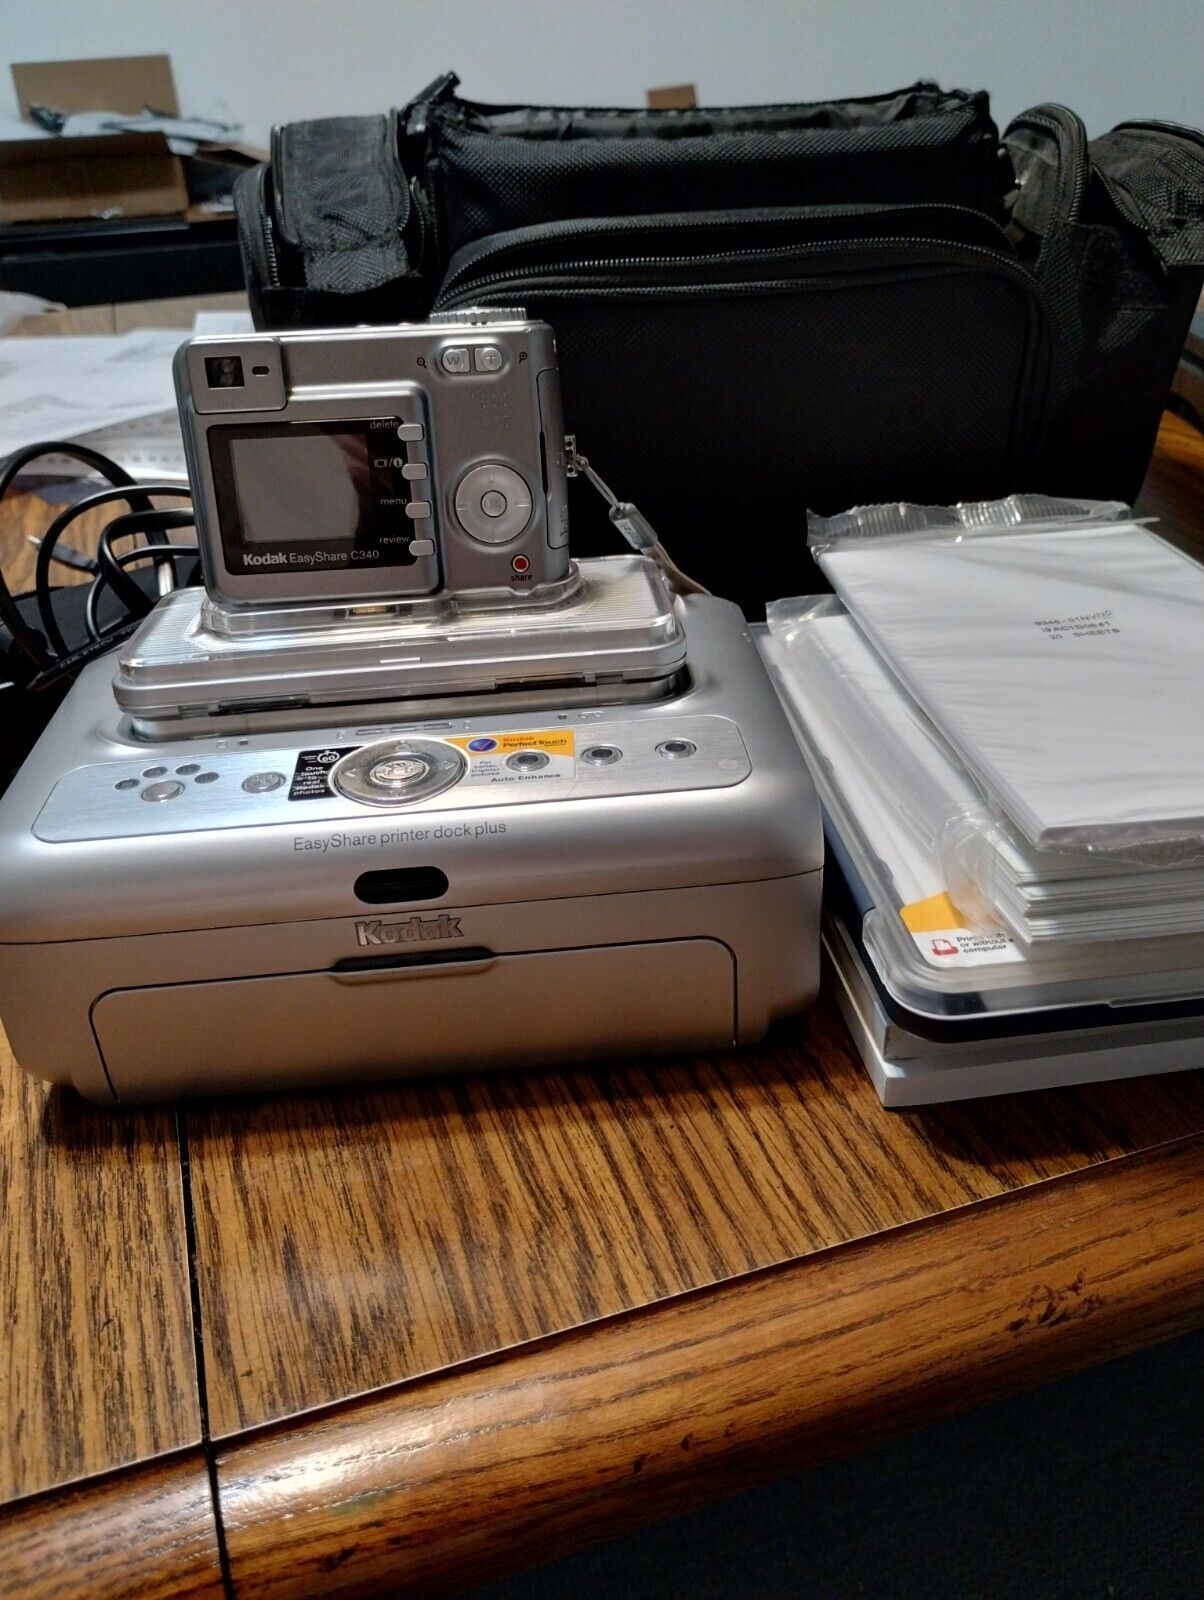 Kodak Easy Share Camera C340 With Printer Dock Plus And Case , Paper